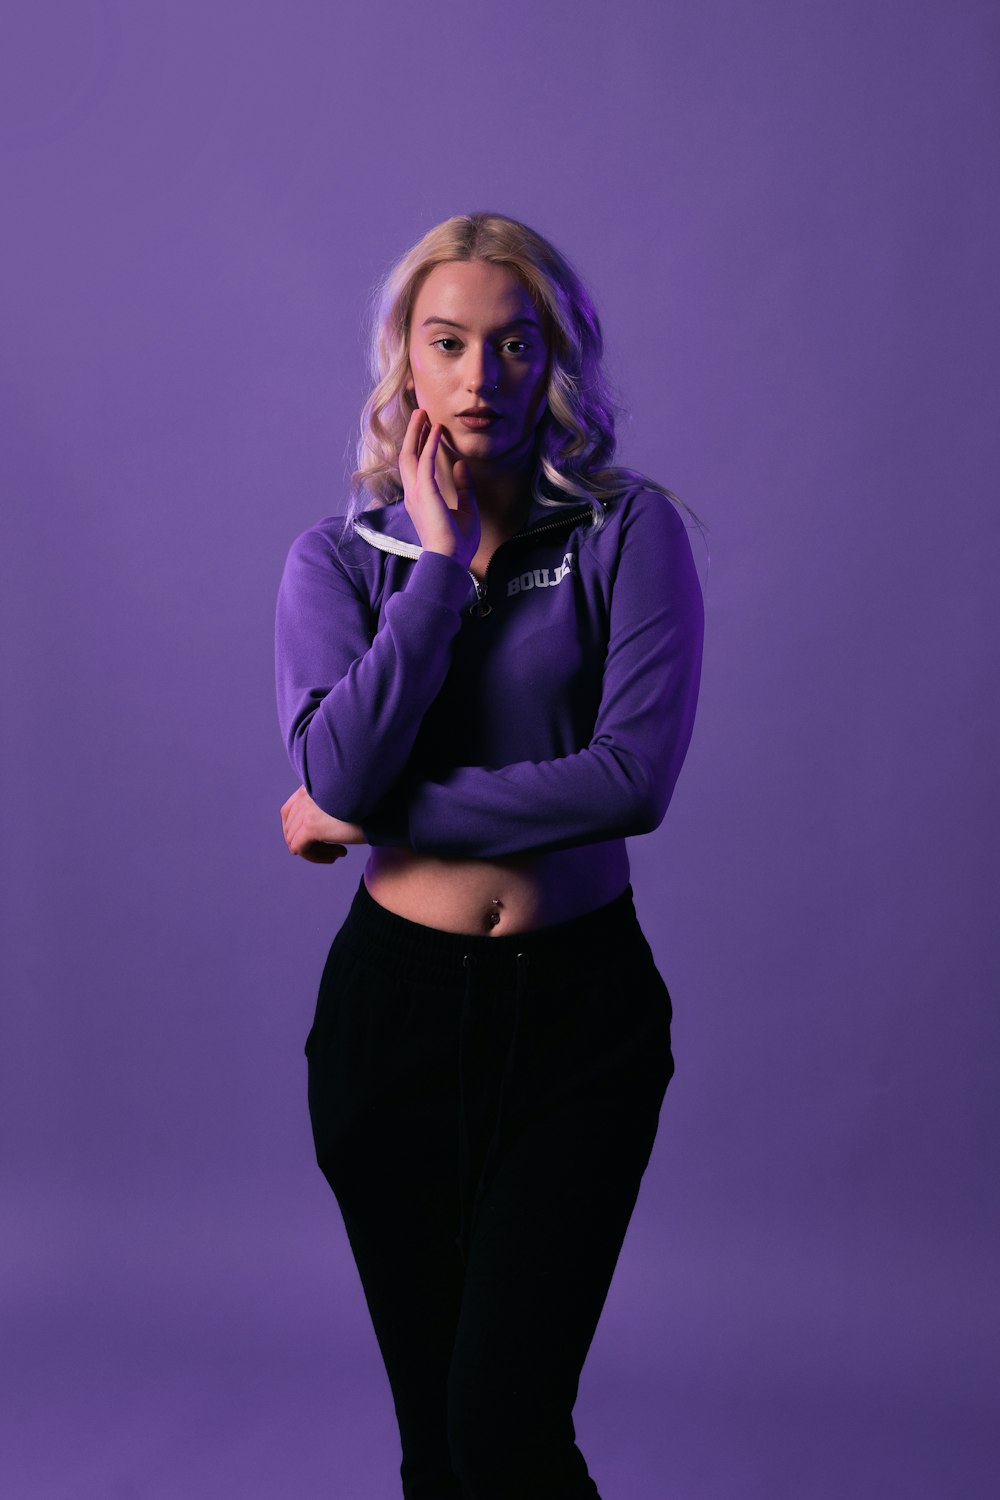 a woman in a purple shirt posing for a picture